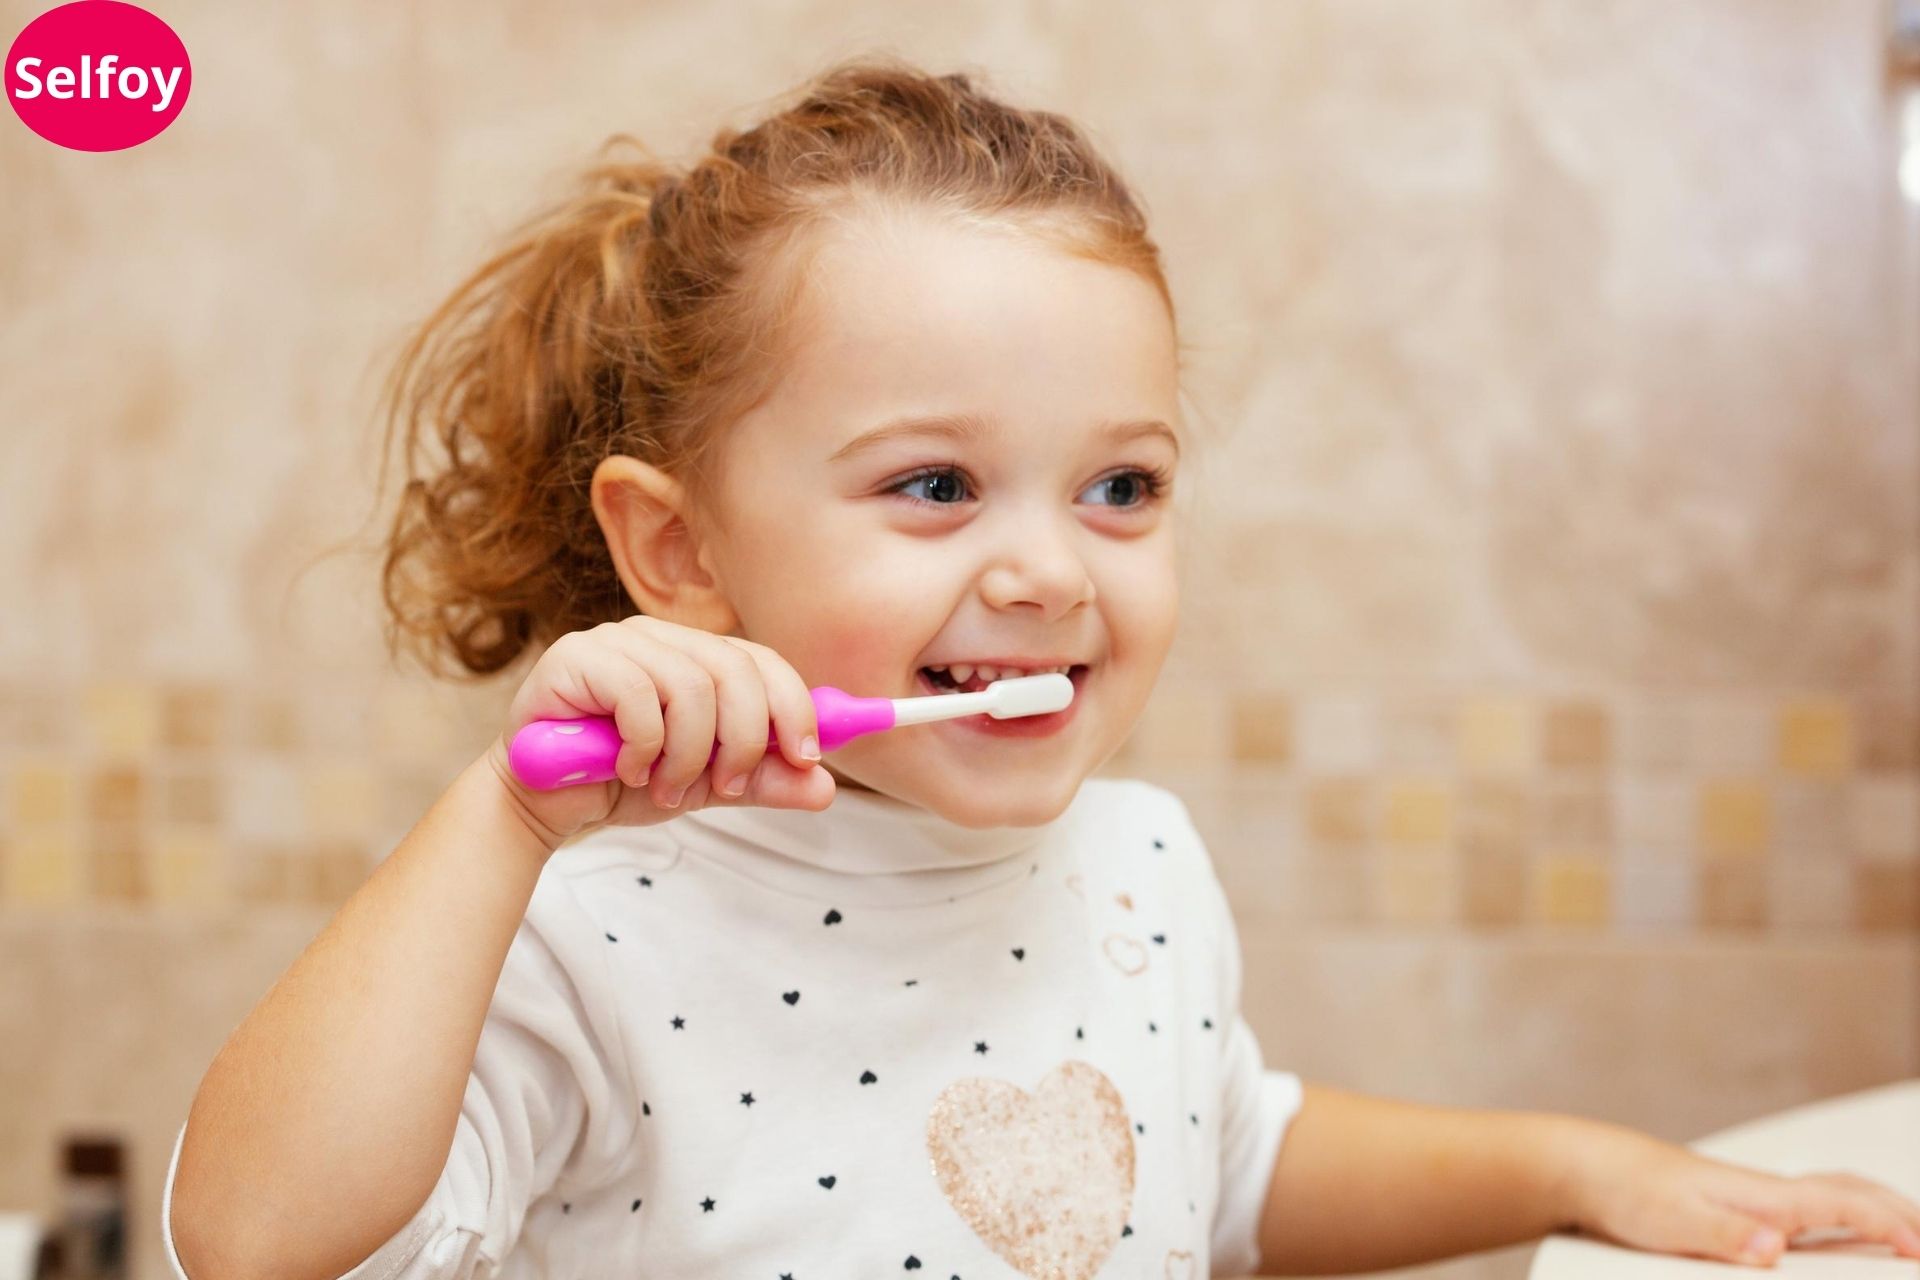 Child has a brush in her hand and brushing teeth to maintain dental hygiene because as Good Personal Hygiene Helps to Develop Positive Self Esteem, Teenage Child Taking Bath 